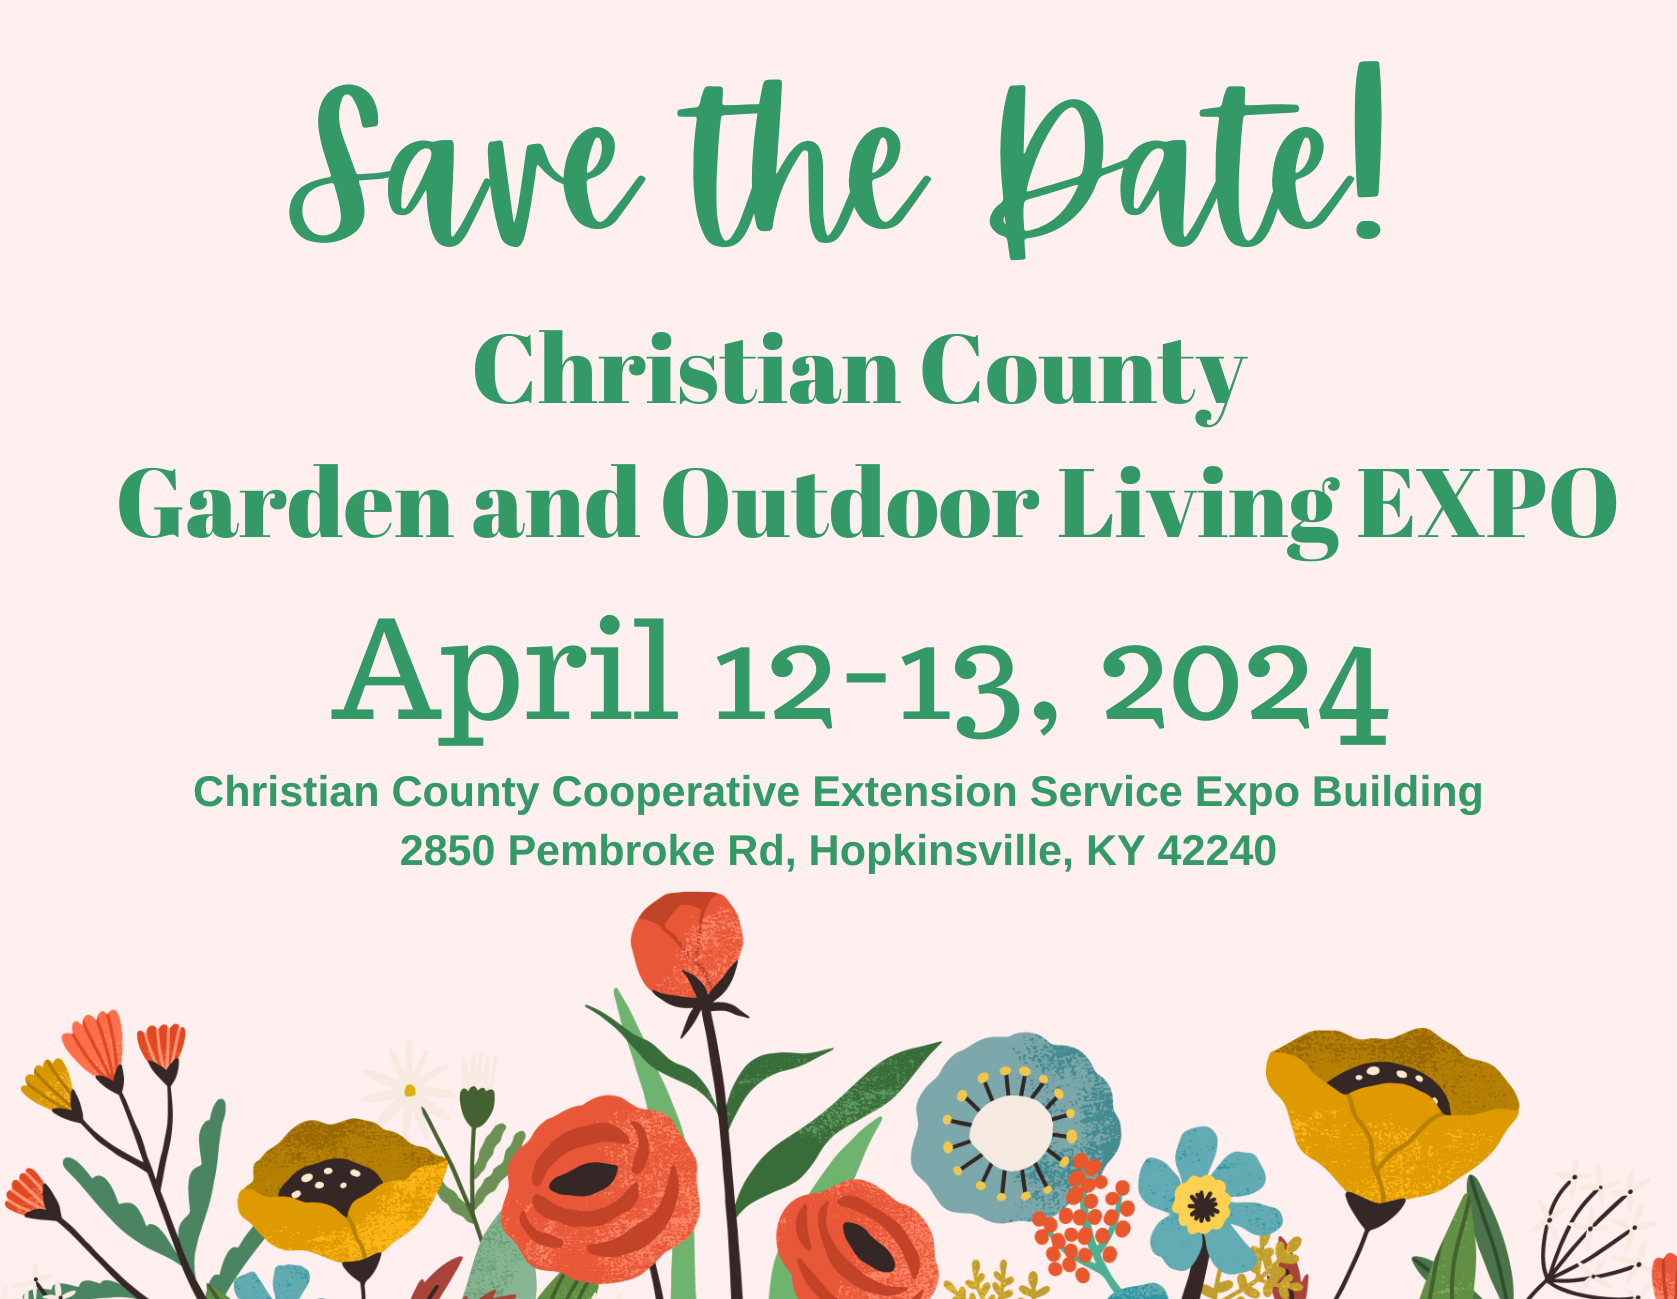 Save the date! Christian County Garden and Outdoor Living EXPO, April 12-13, 2024